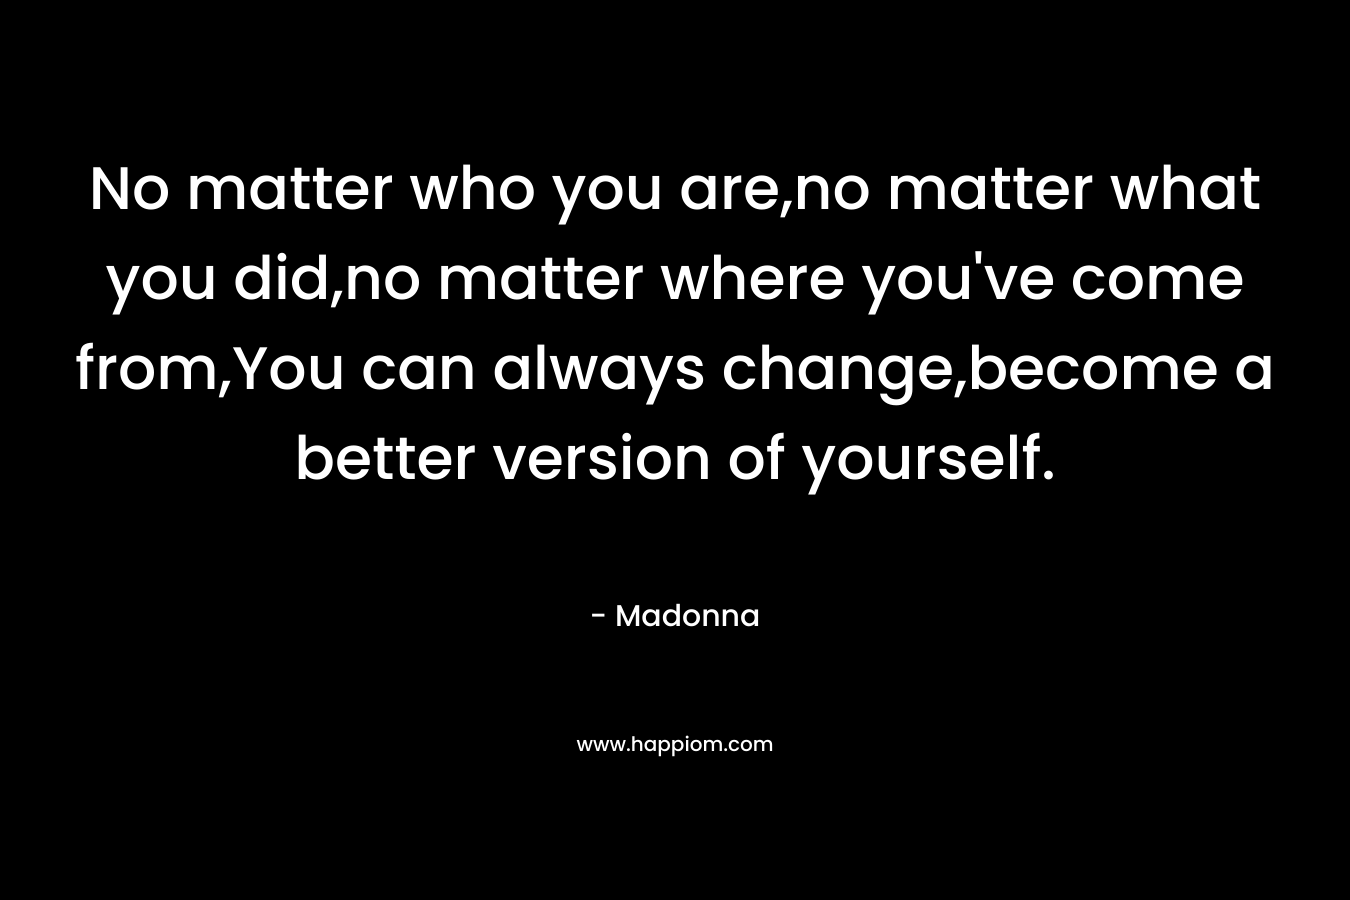 No matter who you are,no matter what you did,no matter where you’ve come from,You can always change,become a better version of yourself. – Madonna